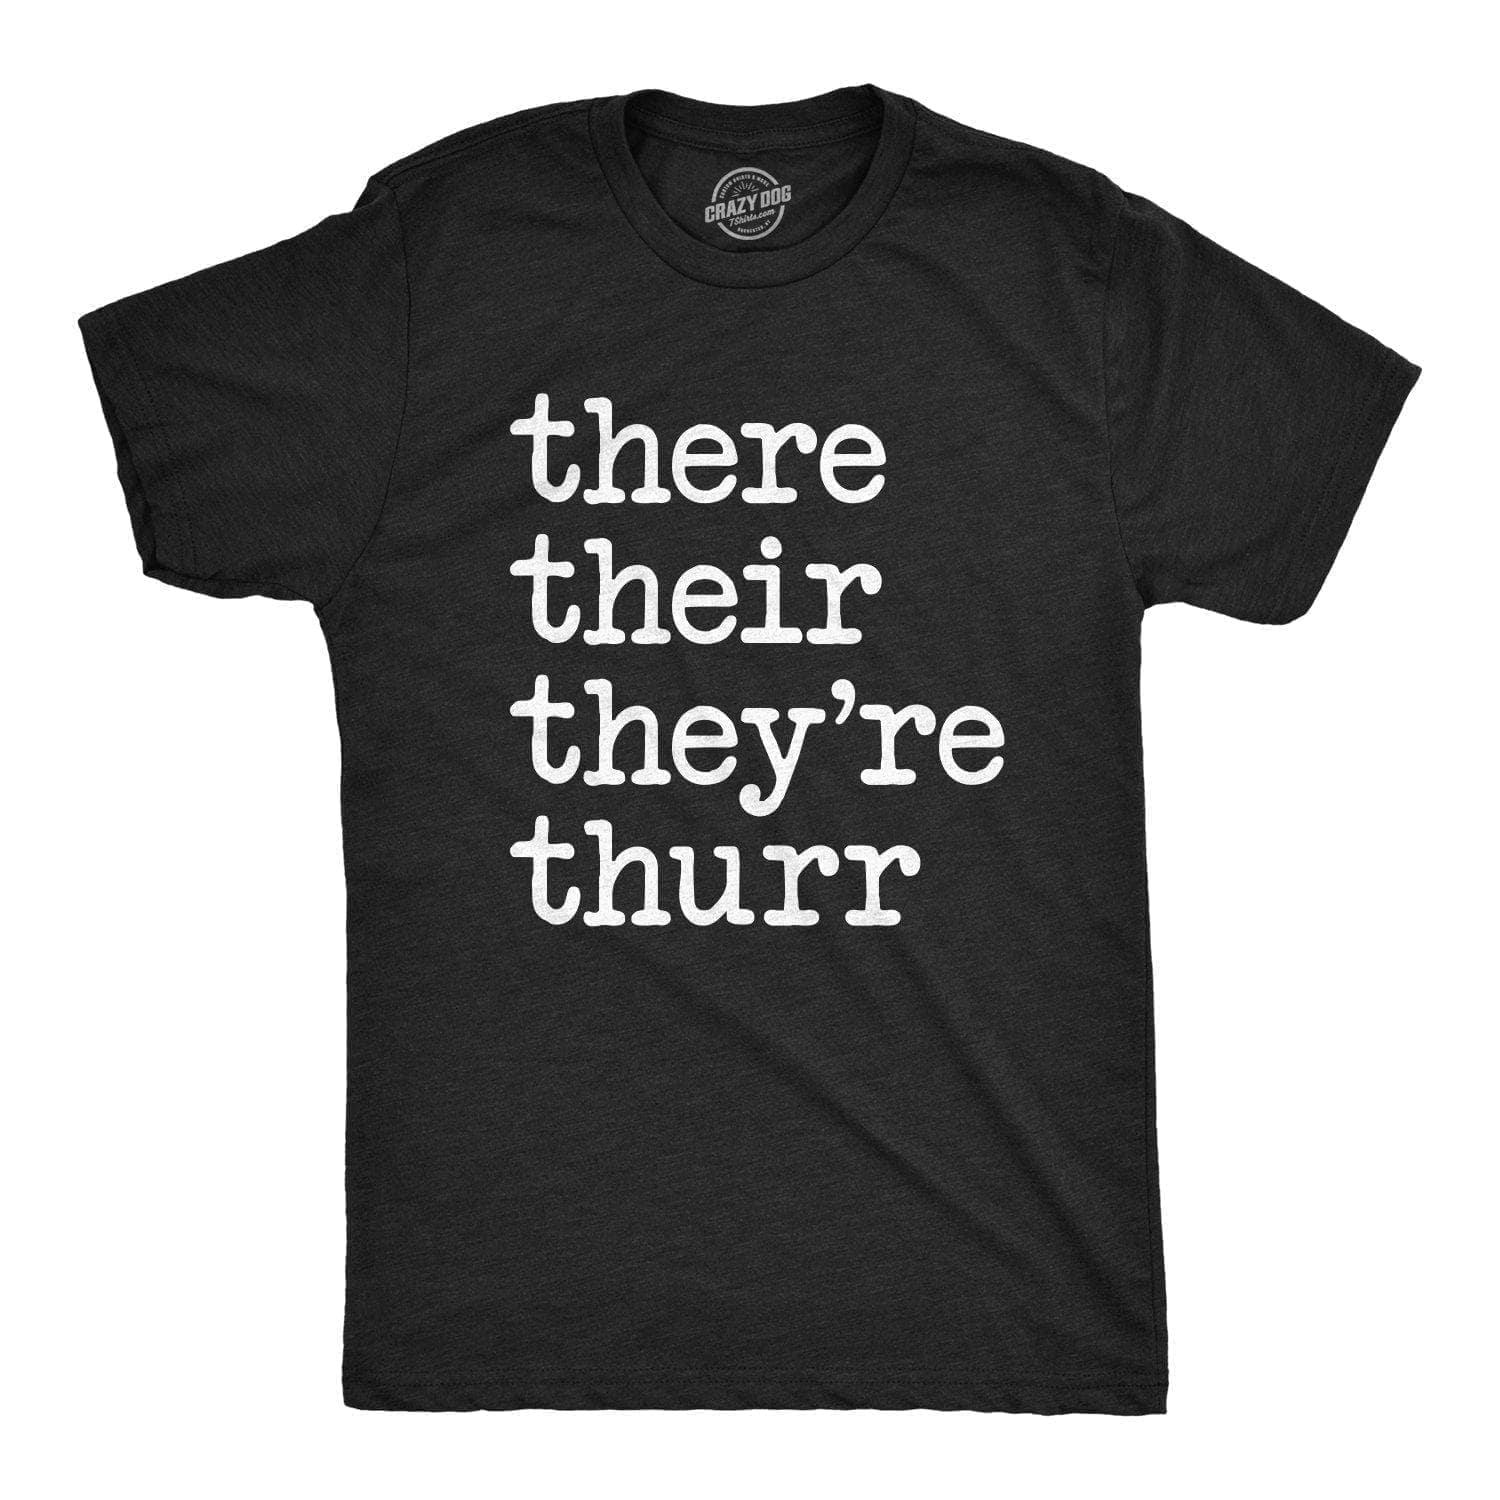 There Their They're Thurr Men's Tshirt  -  Crazy Dog T-Shirts